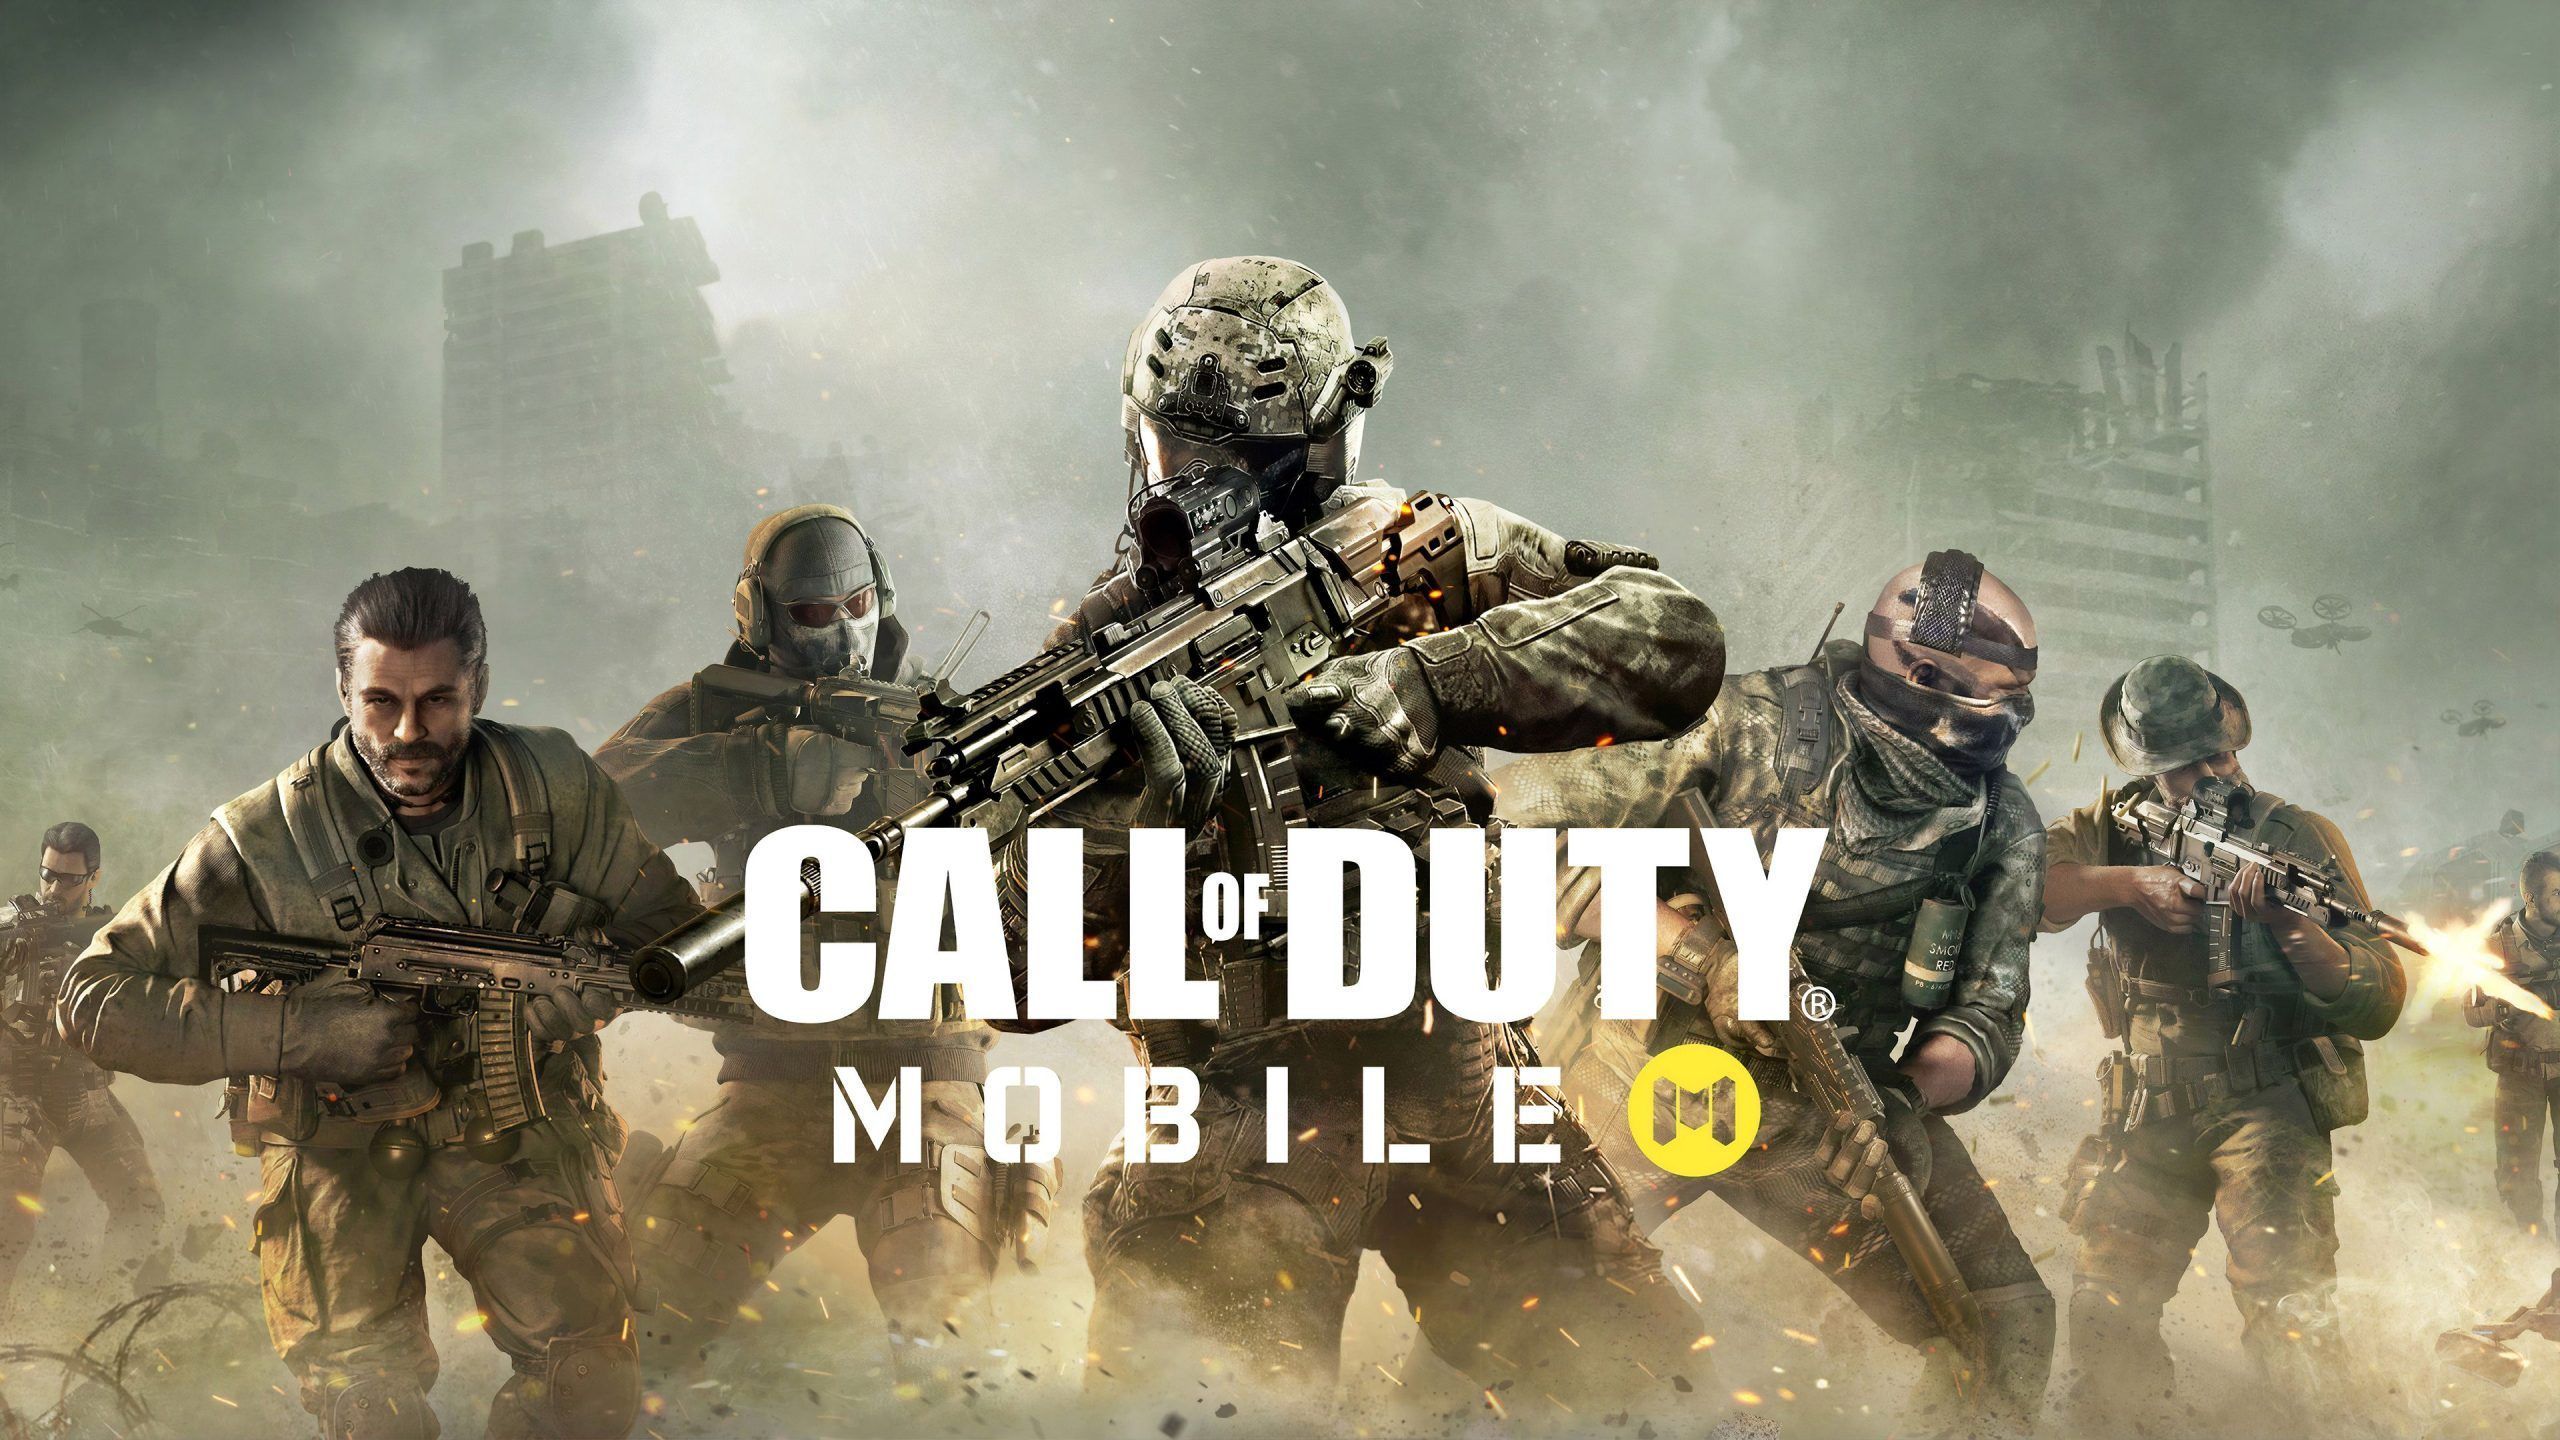 Call of Duty: Mobile gains more Downloads than PUBG Mobile in the First 8 months